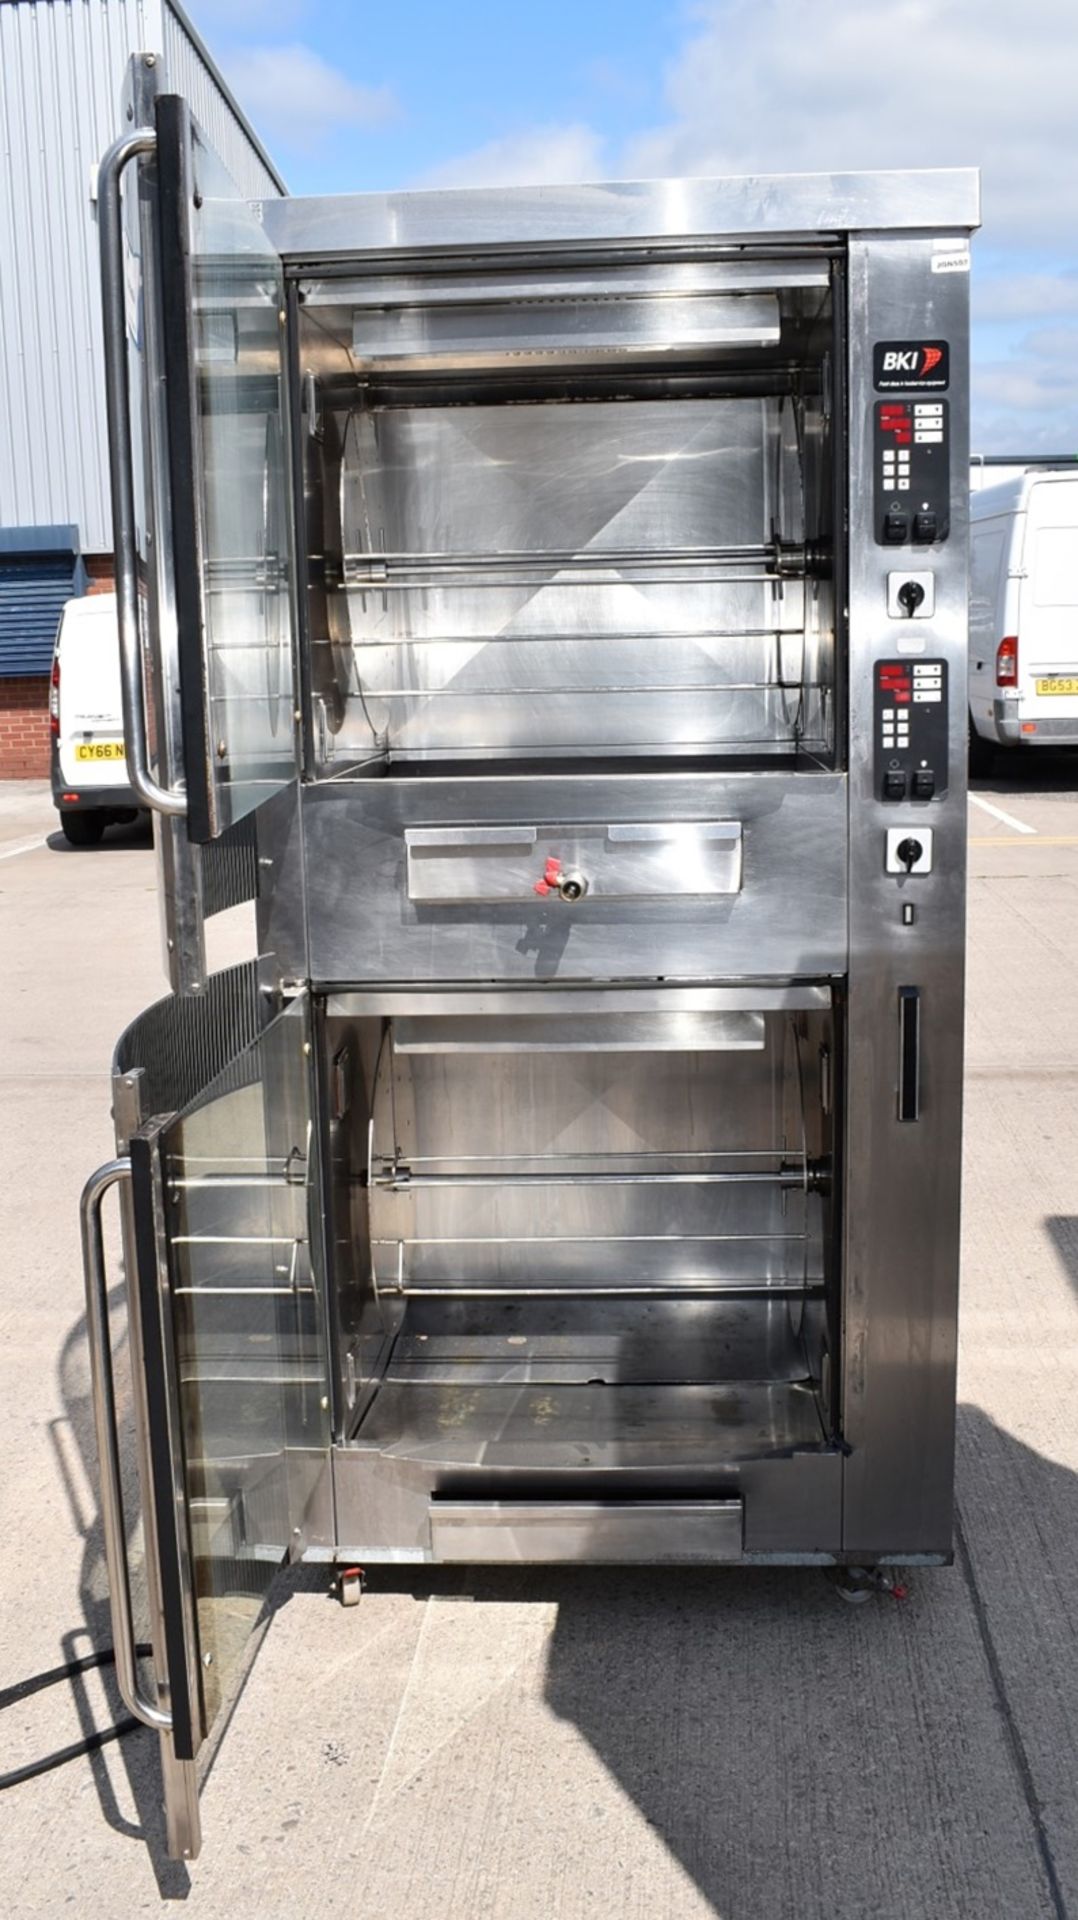 1 x BKI BBQ King Commercial Double Rotisserie Chicken Oven With Stand - Type VGUK16 - 3 Phase - Image 10 of 21